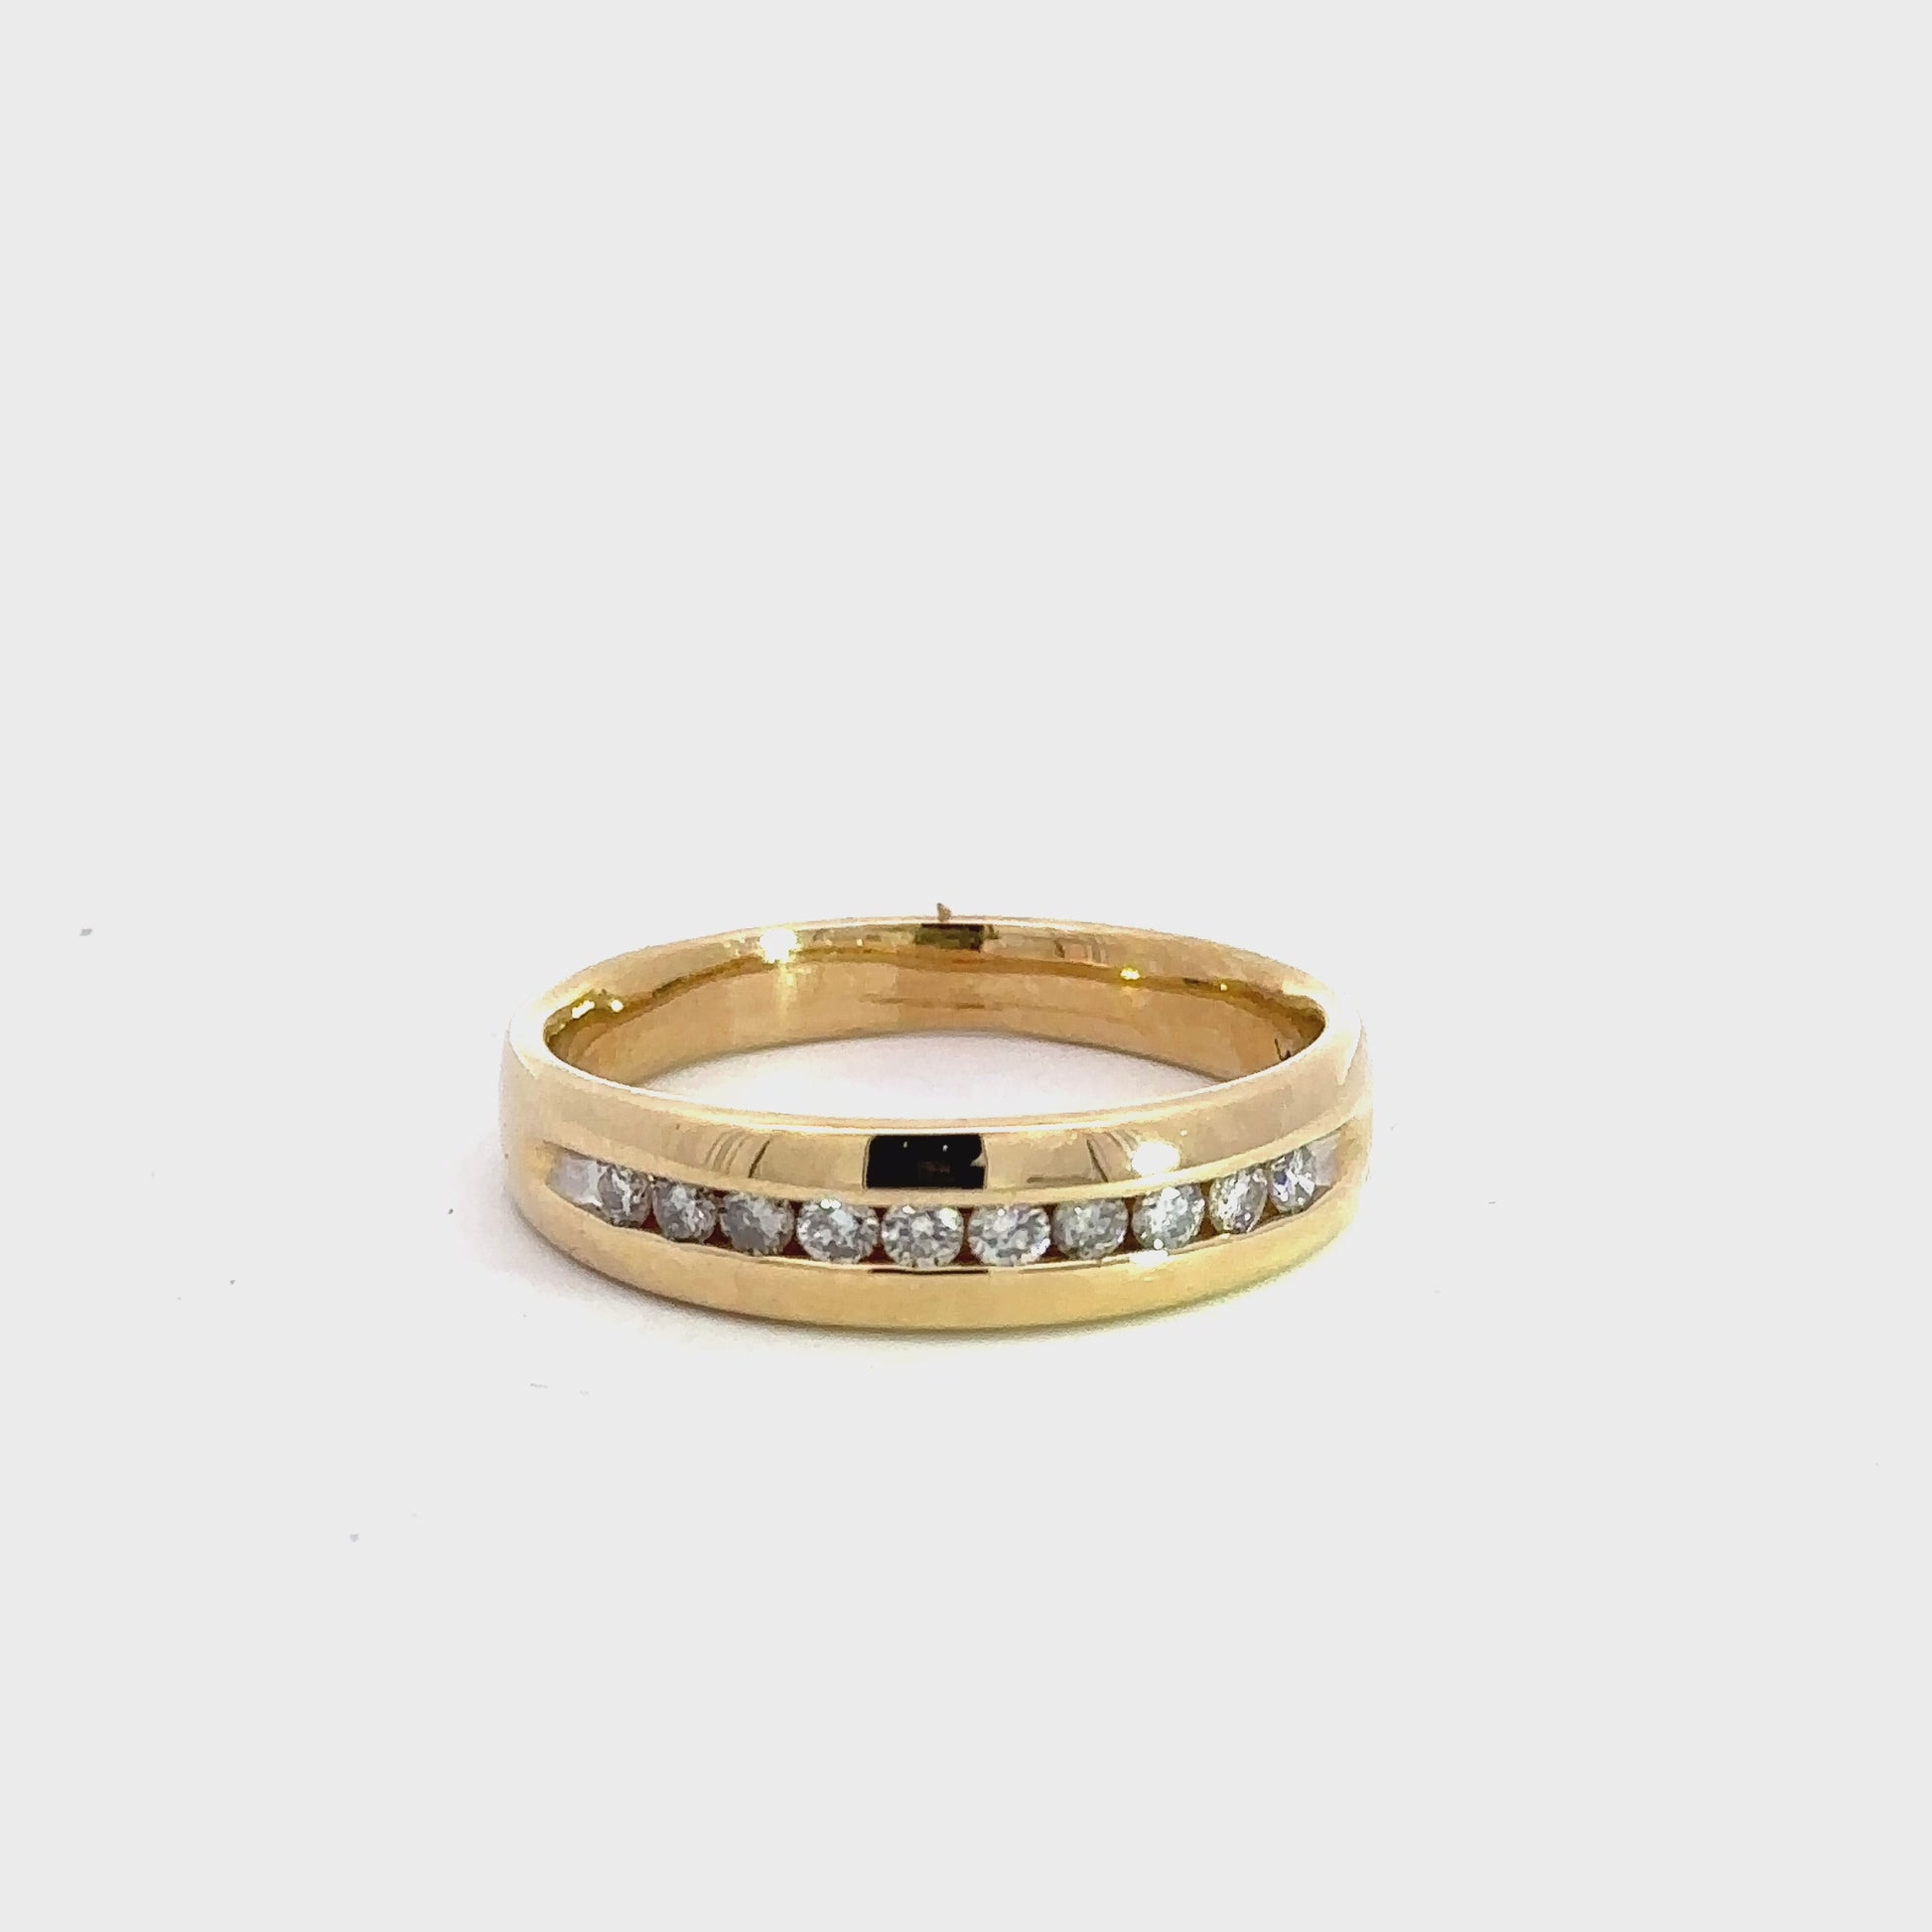 360 video of yellow gold diamond band ring with 10 round diamonds on half the band 